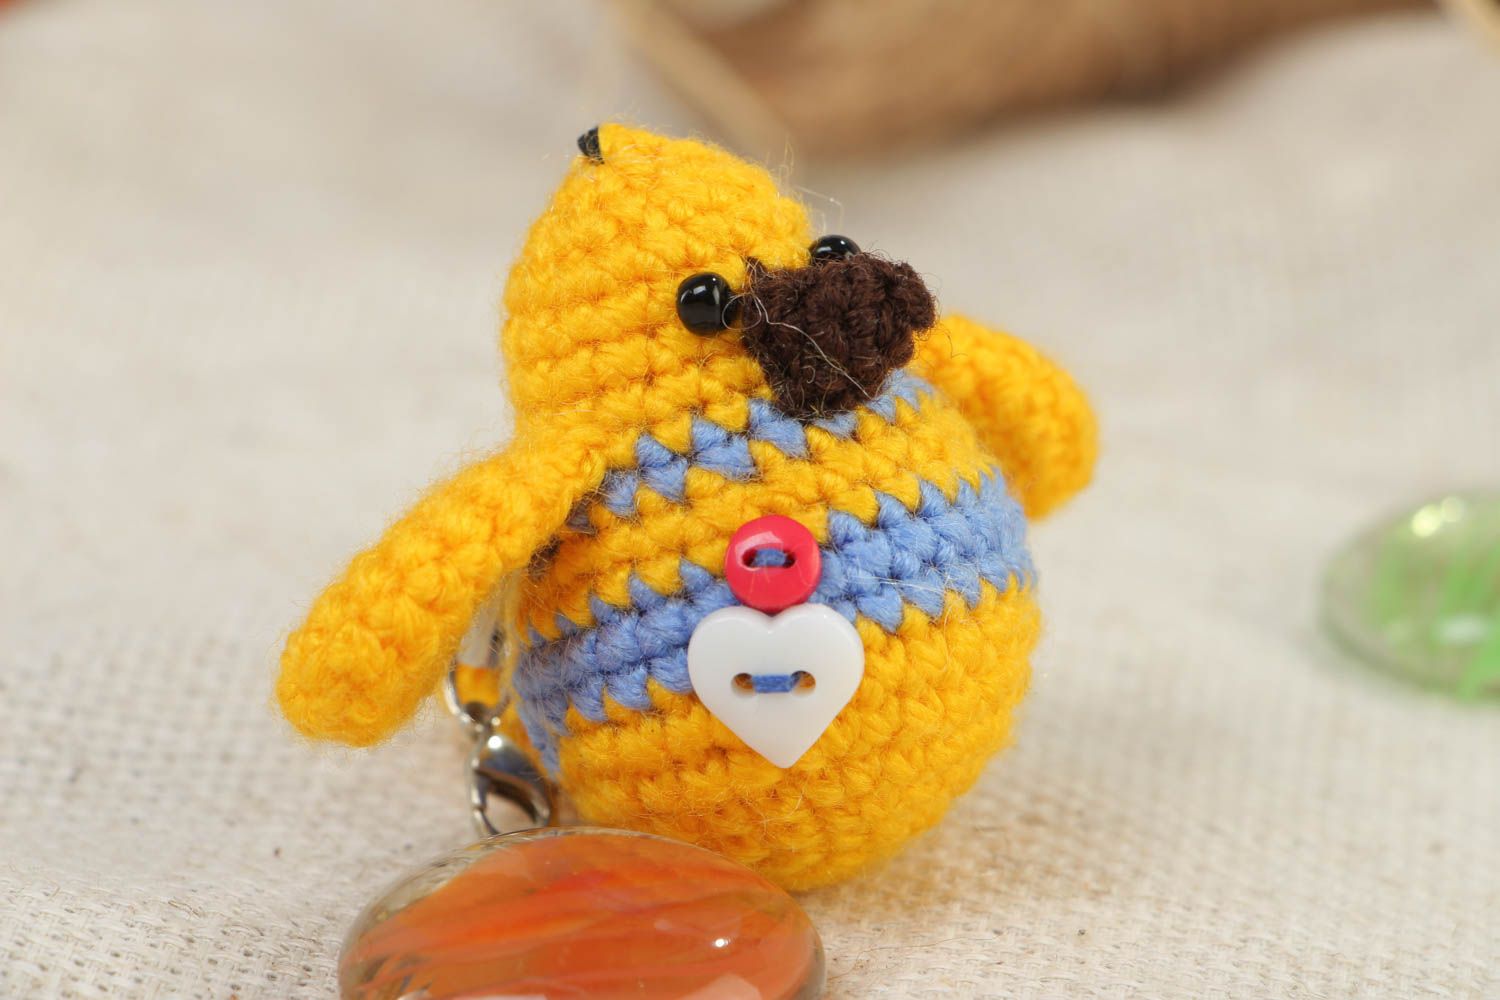 Handmade crocheted soft toy keychain in the shape of small yellow chicken photo 1